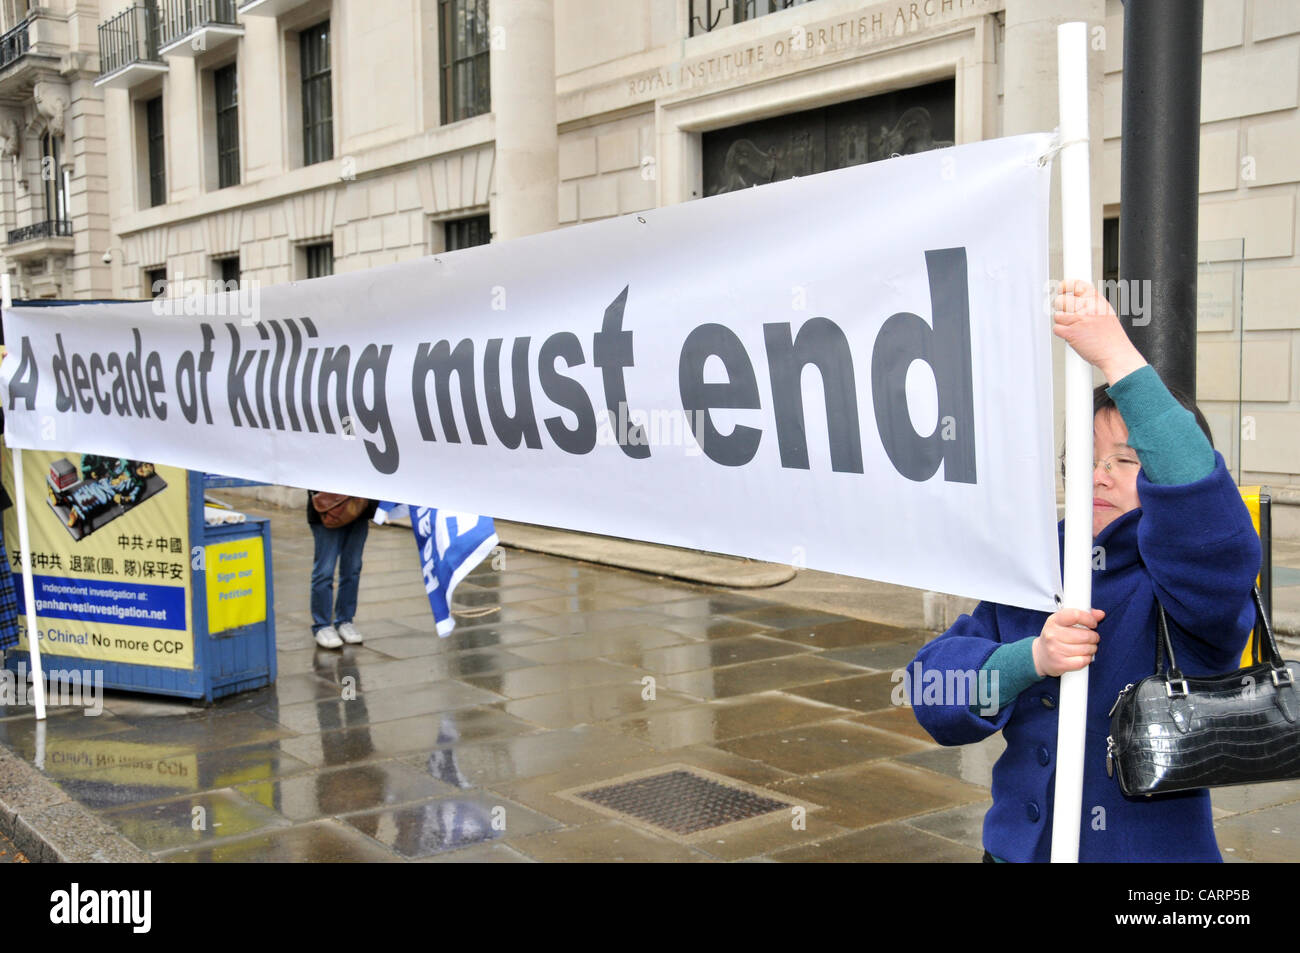 Falun Dafa protesters hold banners opposite the Chinese Embassy in London. A spiritual discipline in China from 1992, the practice is now banned in China and members claim human rights abuses by the Chinese government. Sunday 15th April 2012 Stock Photo